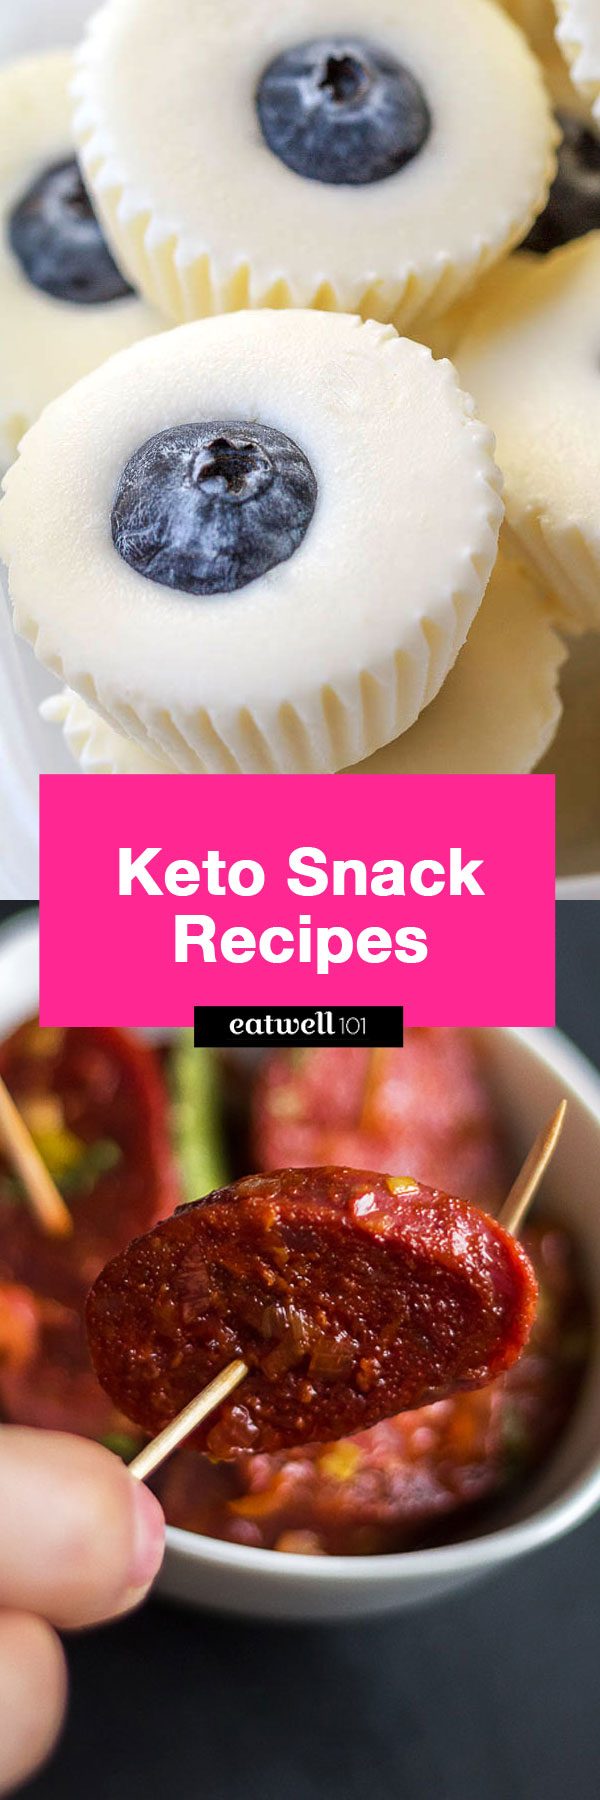 Keto snack recipes - These recipes will help you refuel with healthy fat snacks that will keep you going until dinner. 